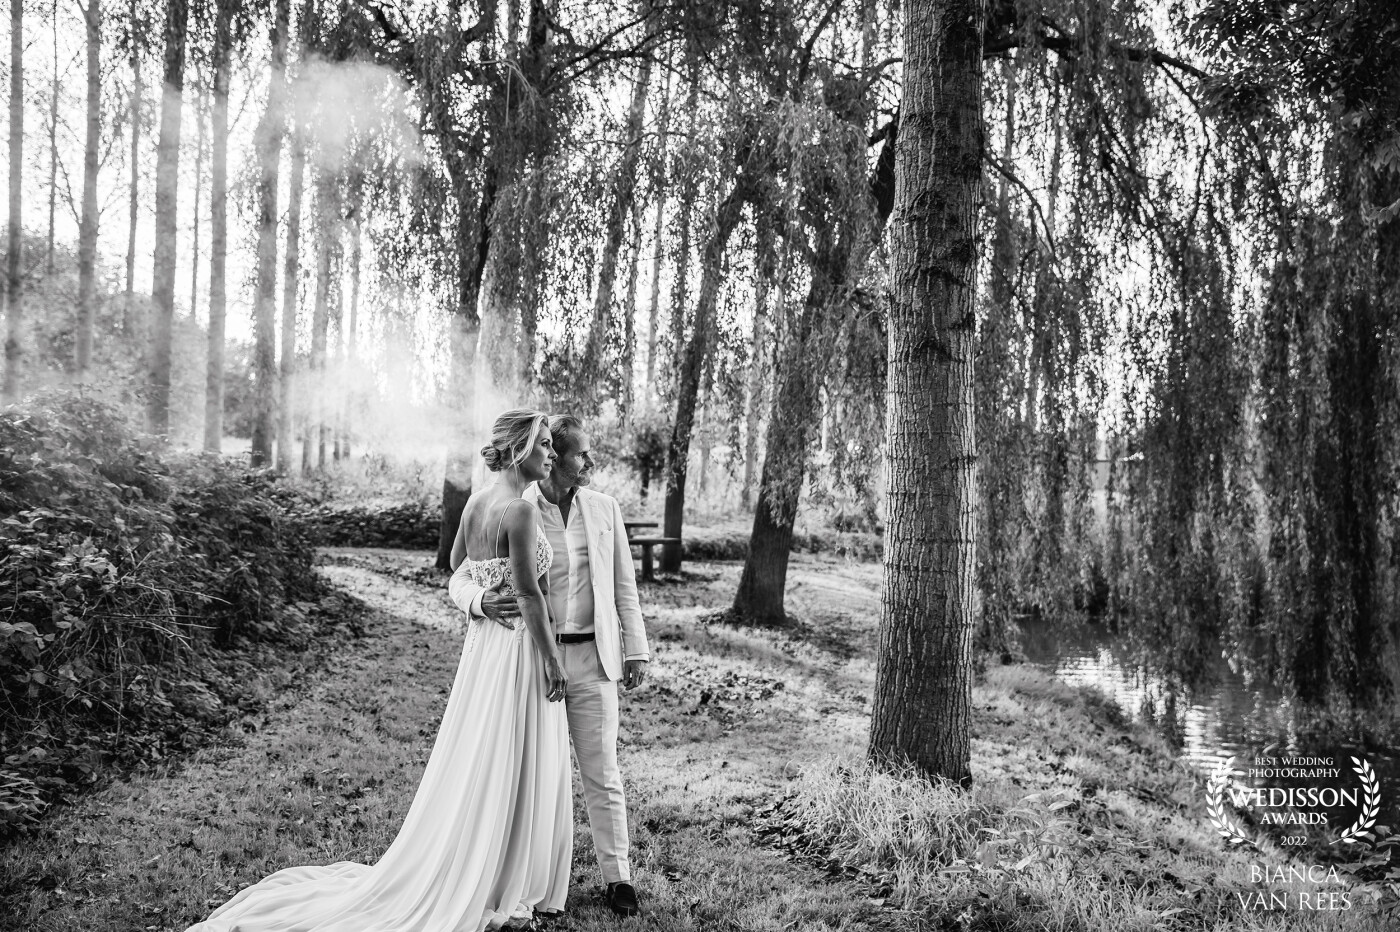 We planned the wedding reportage in the late afternoon, after the church ceremony and before  dinner. Because the wedding was mid-September, the sun was already quite low and shining through the trees. The light was so beautiful that day, and the touch of smoke gives the photo a little extra magic. Their love truly radiates in this photo.